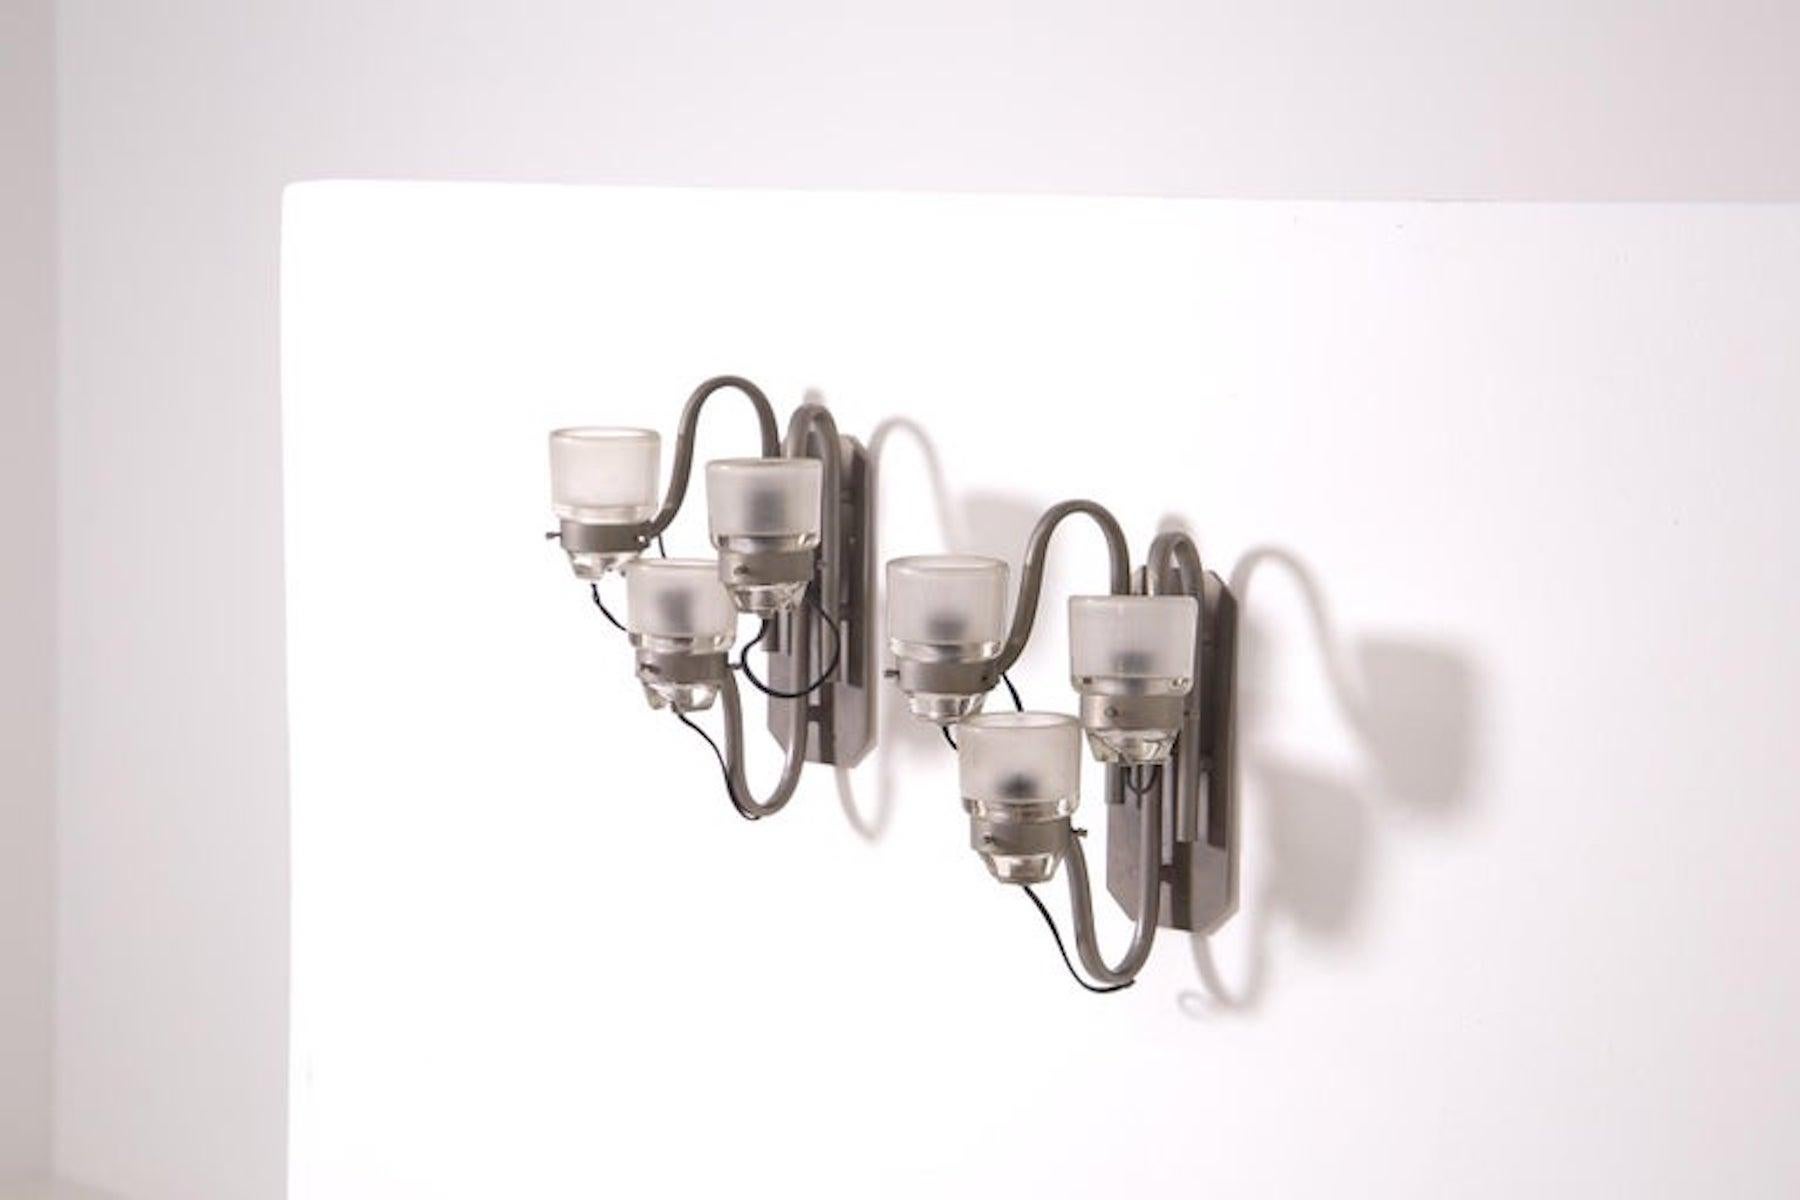 Pair of Wall Lamp Attr. to Joe Colombo for Oluce in Nickel-Plated Brass 1